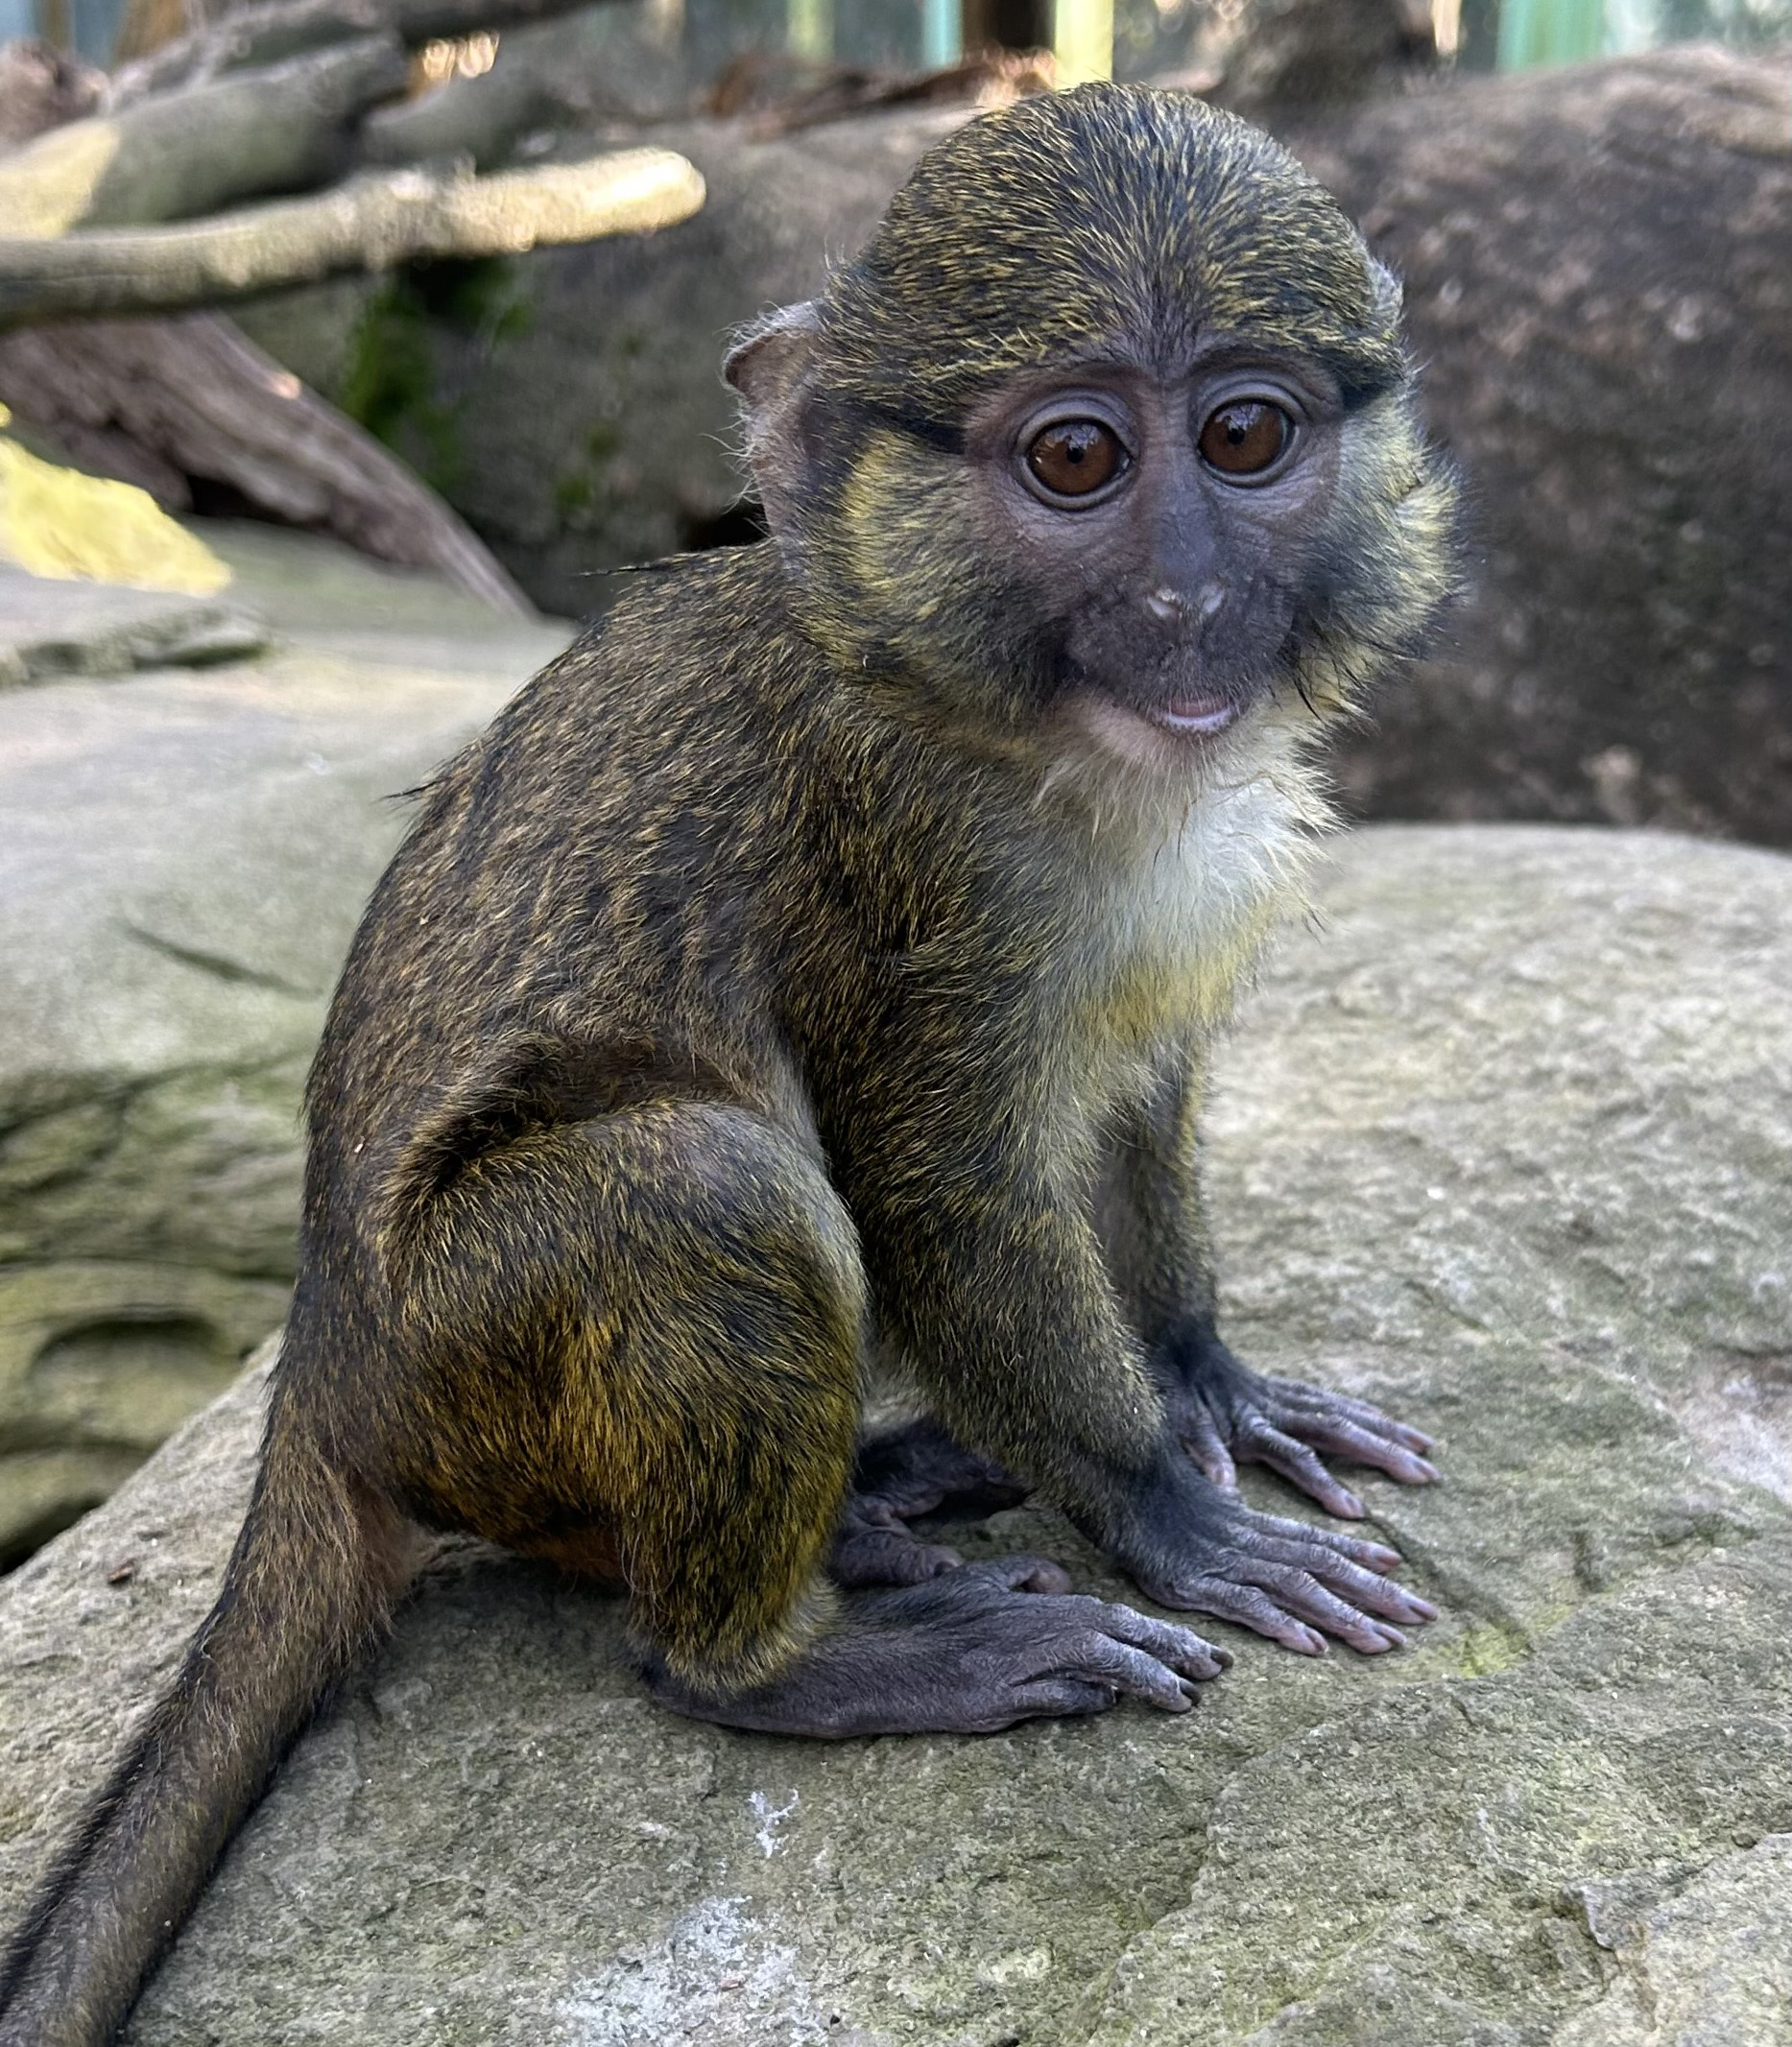 A juvenile swamp monkey poses on a rock in the animals' outdoor exhibit area.